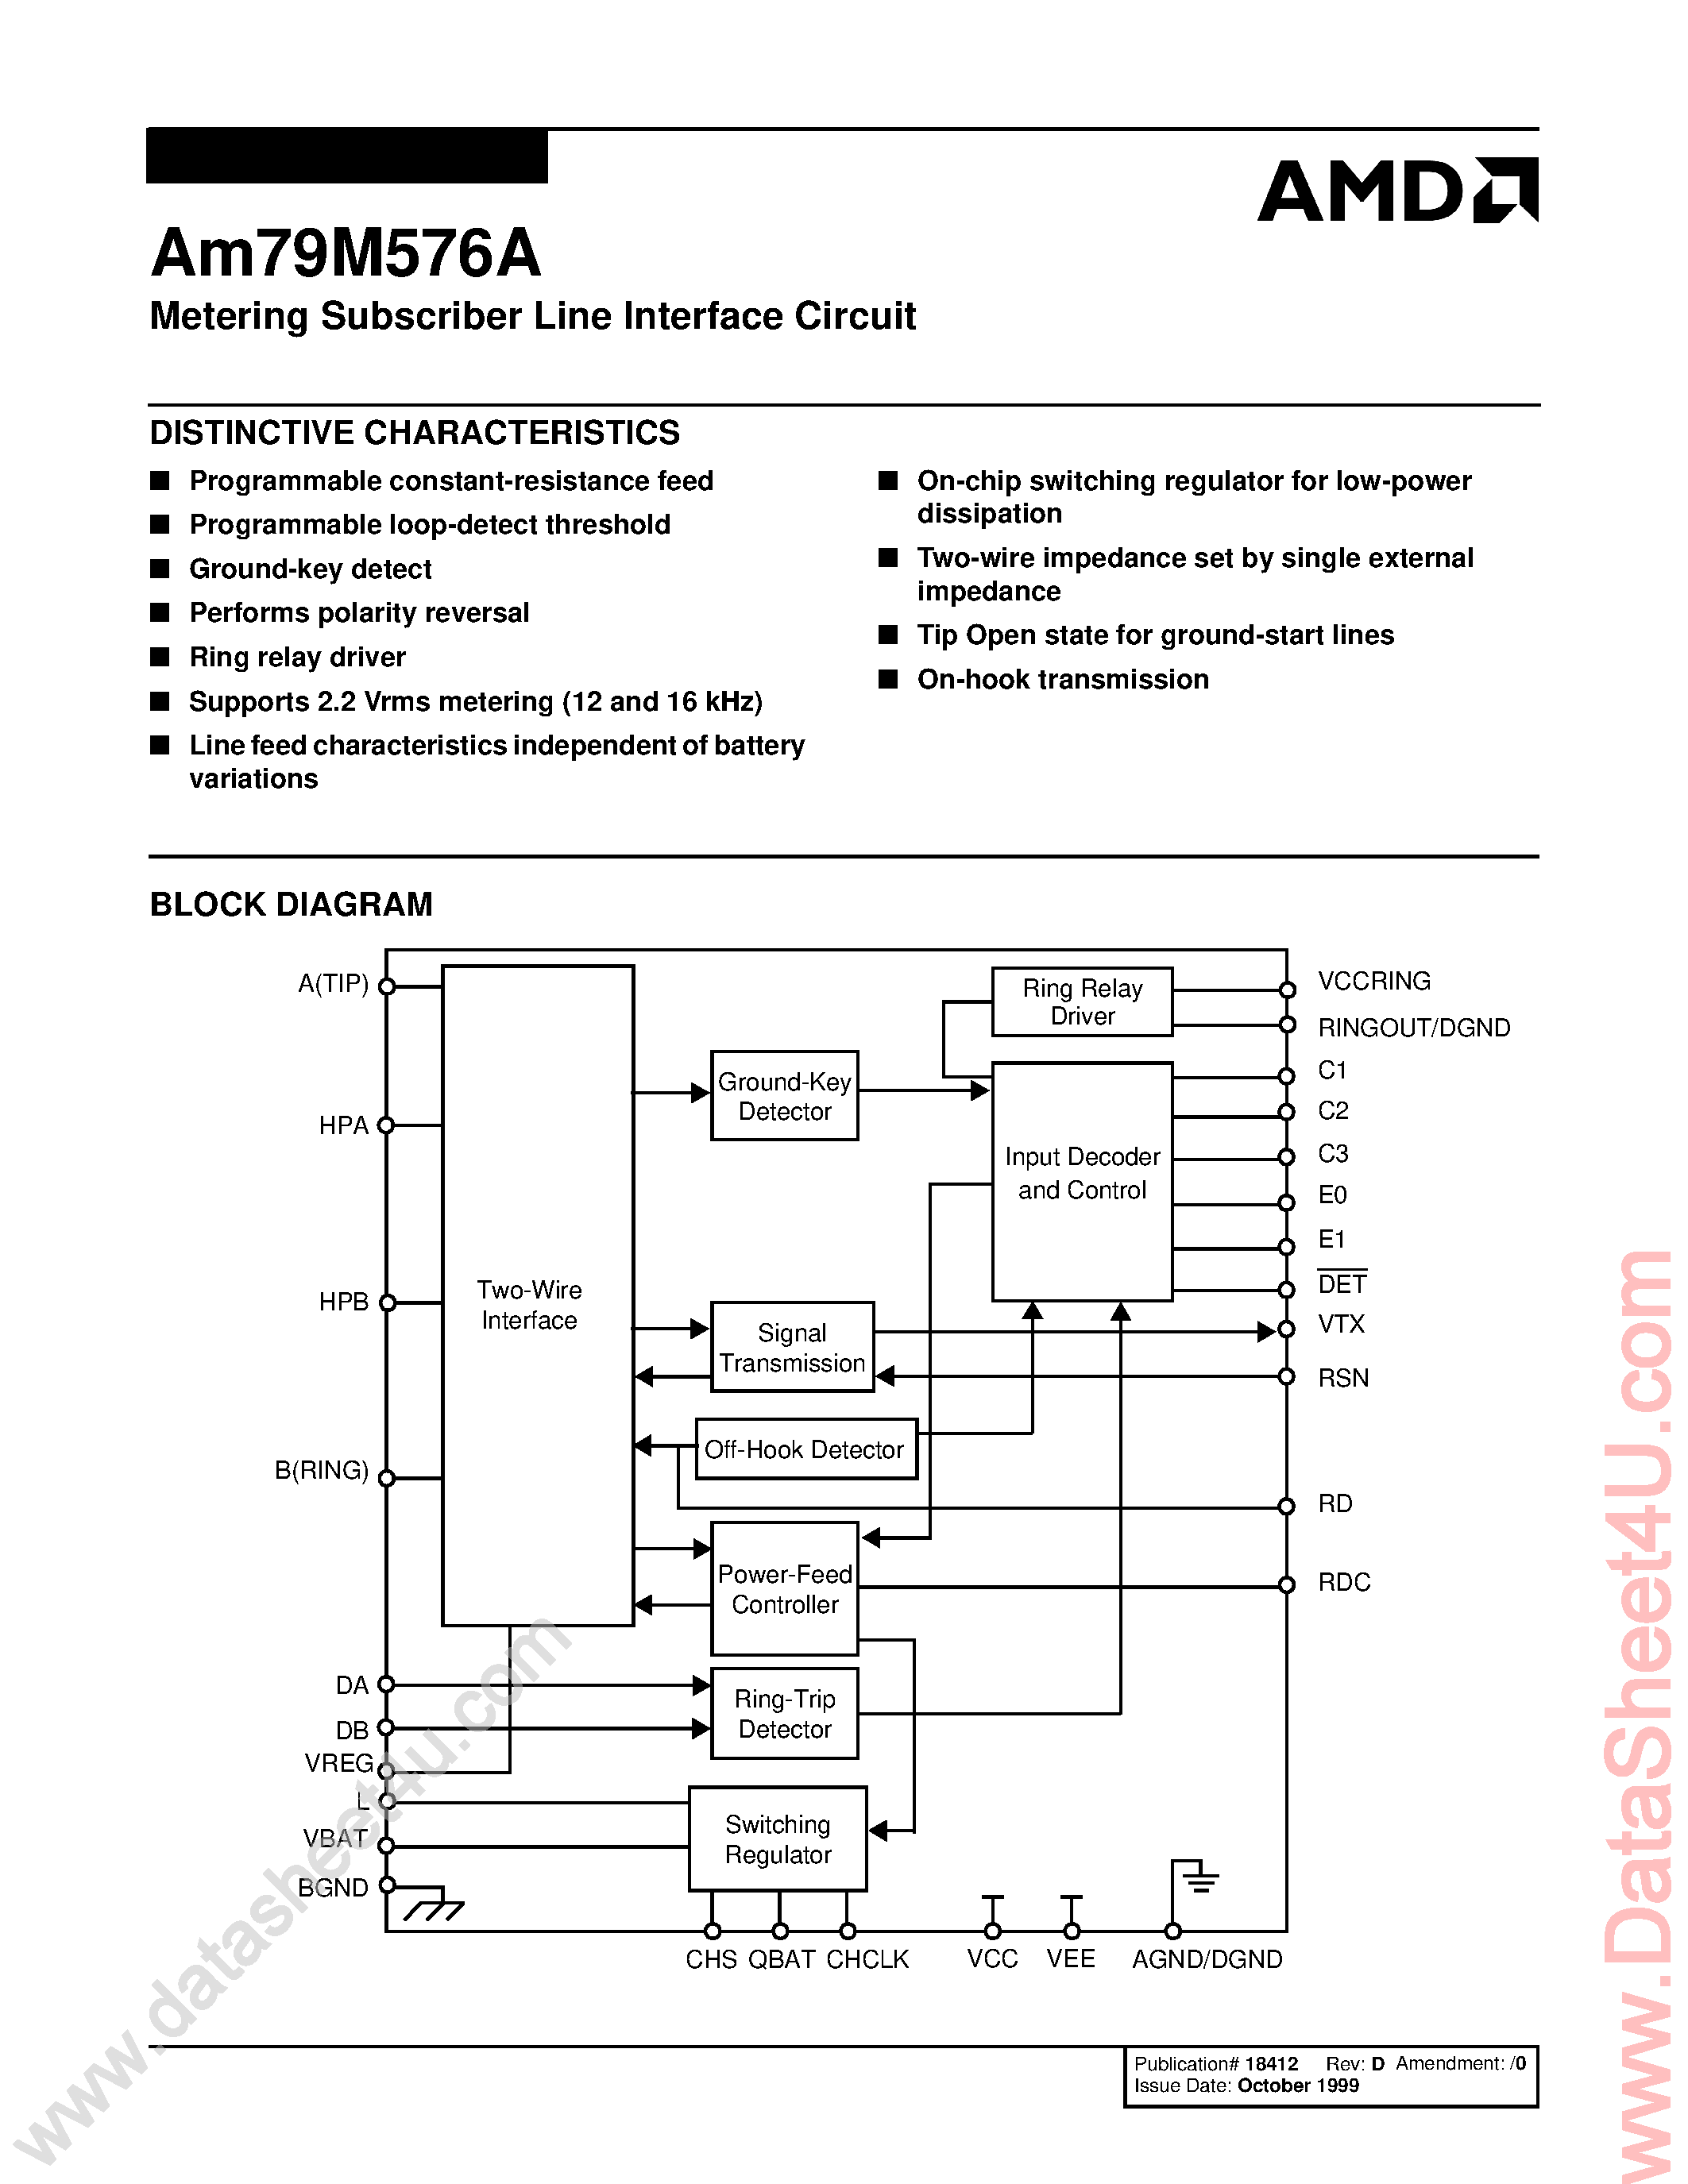 Даташит AM79M576A-Metering Subscriber Line Interface Circuit страница 1